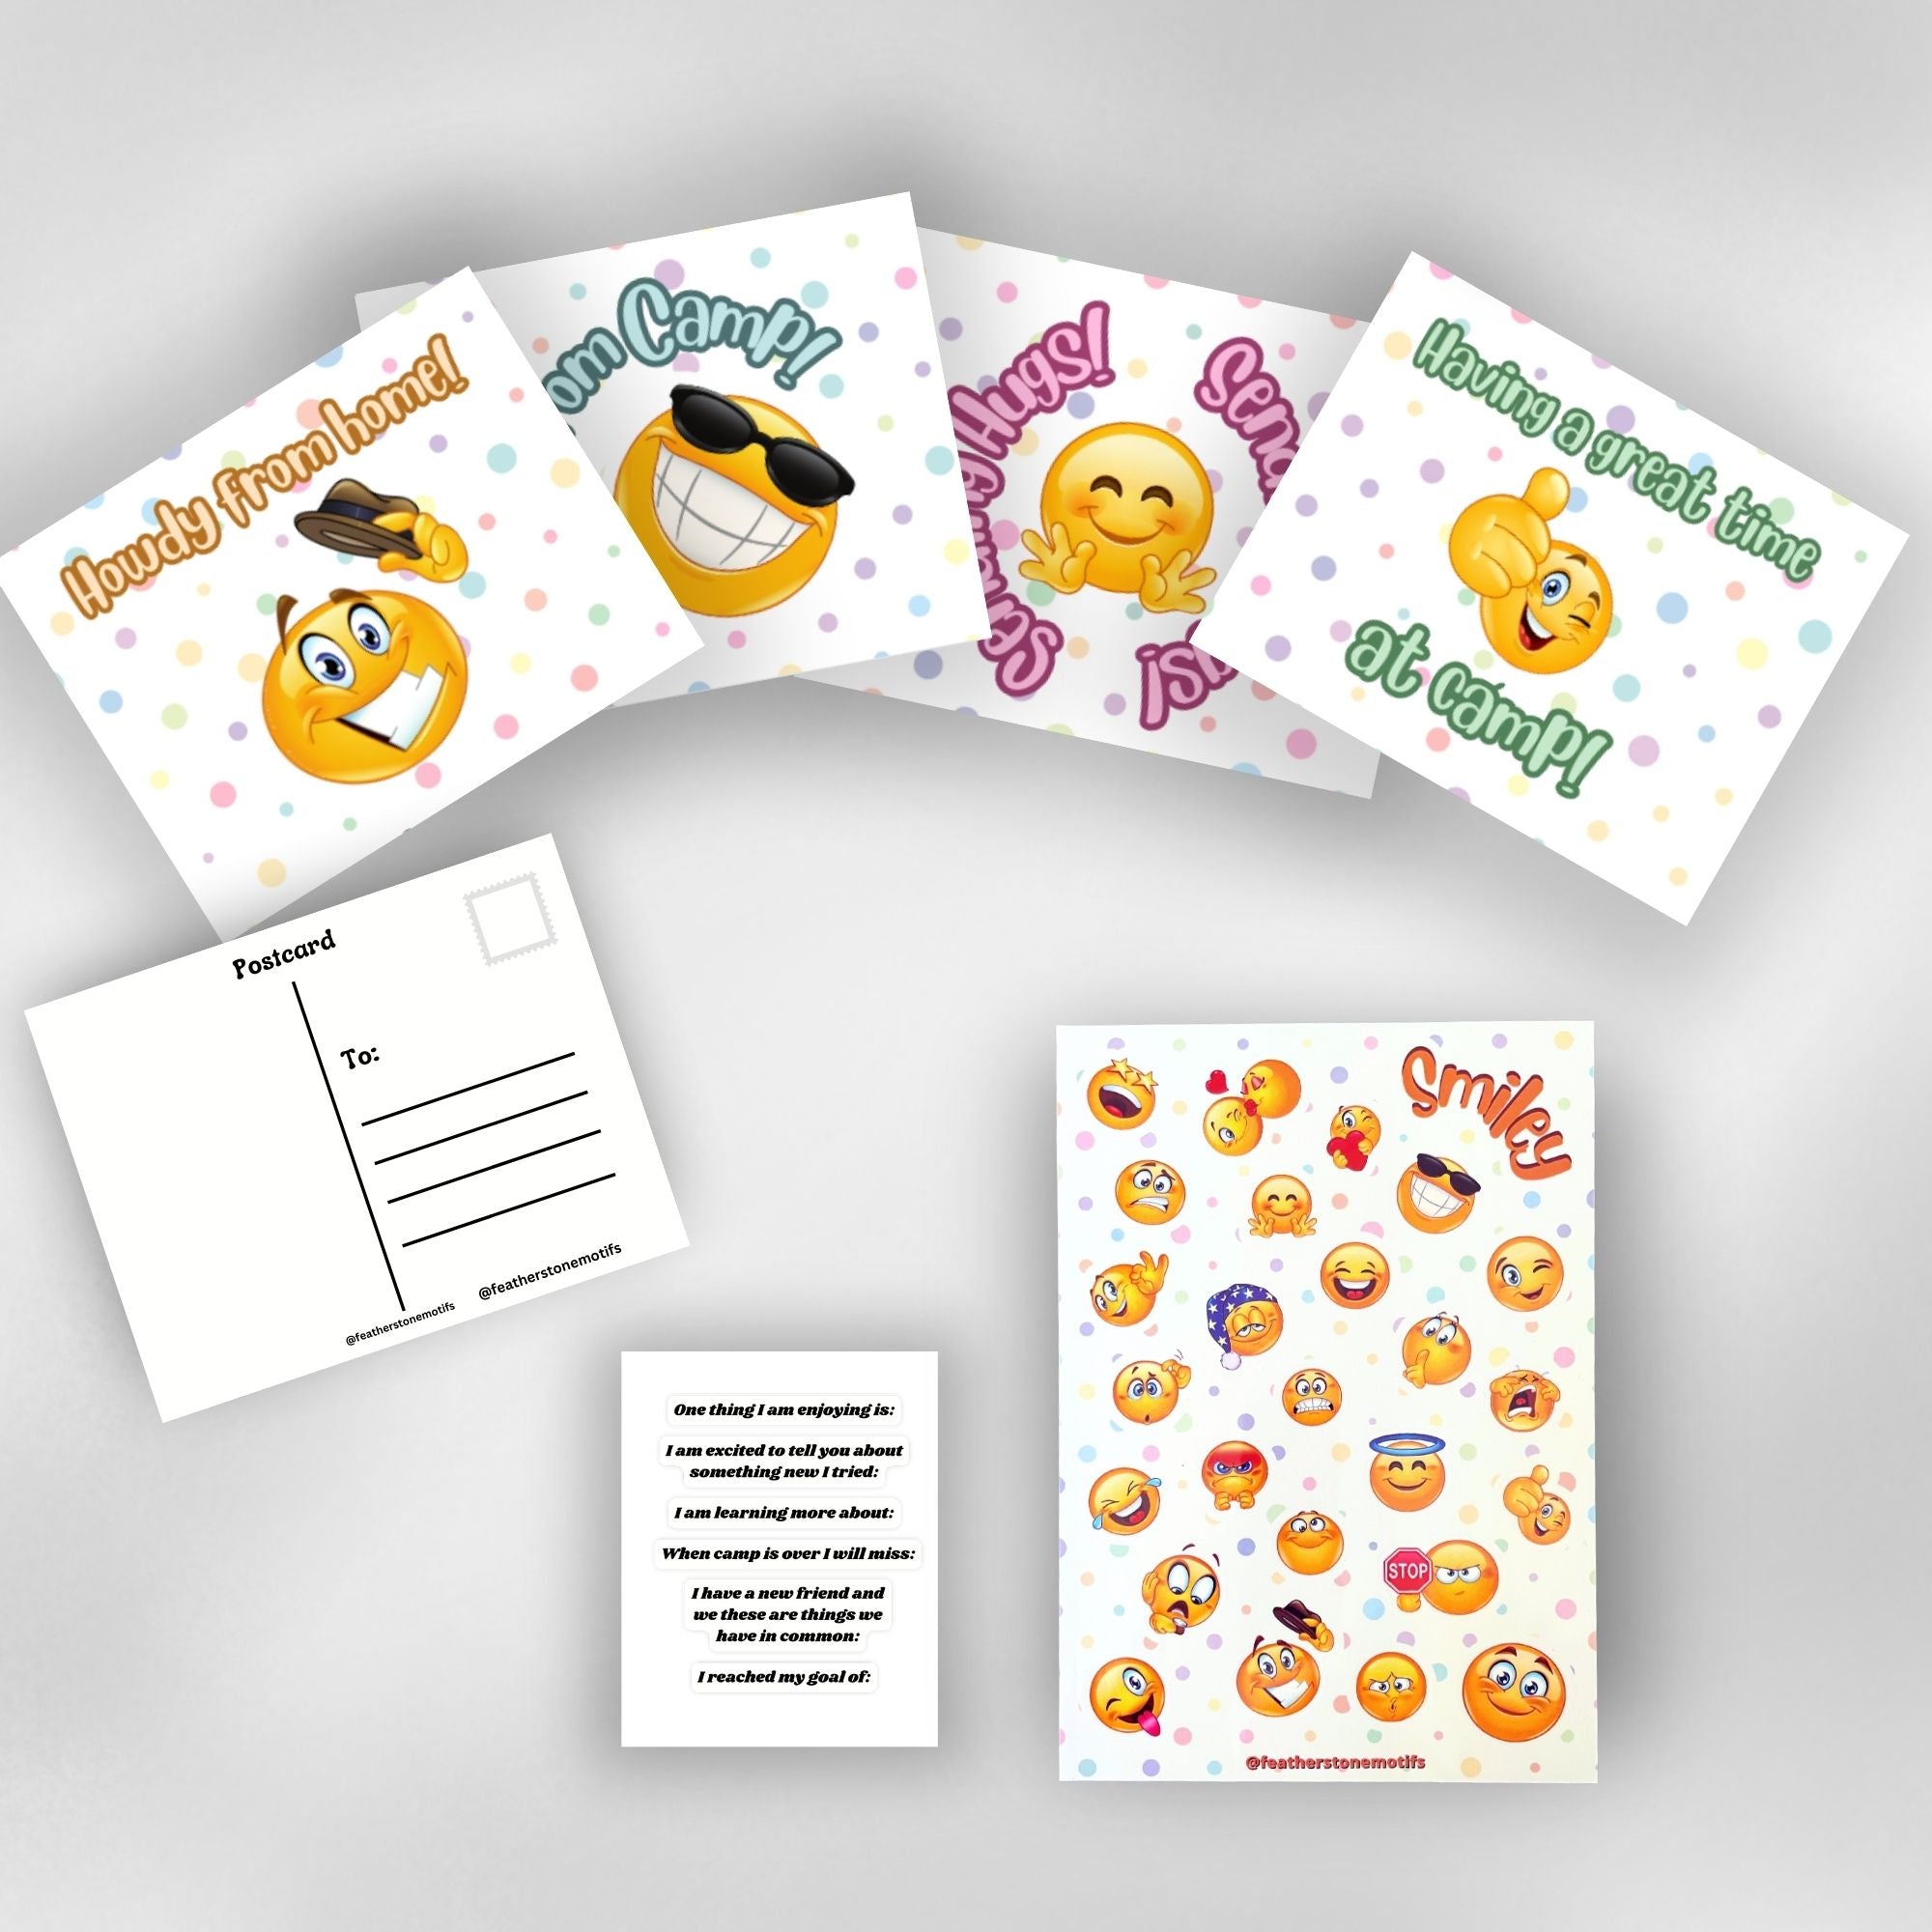 This image shows the full Smiley themed Camp Postcard Kit.